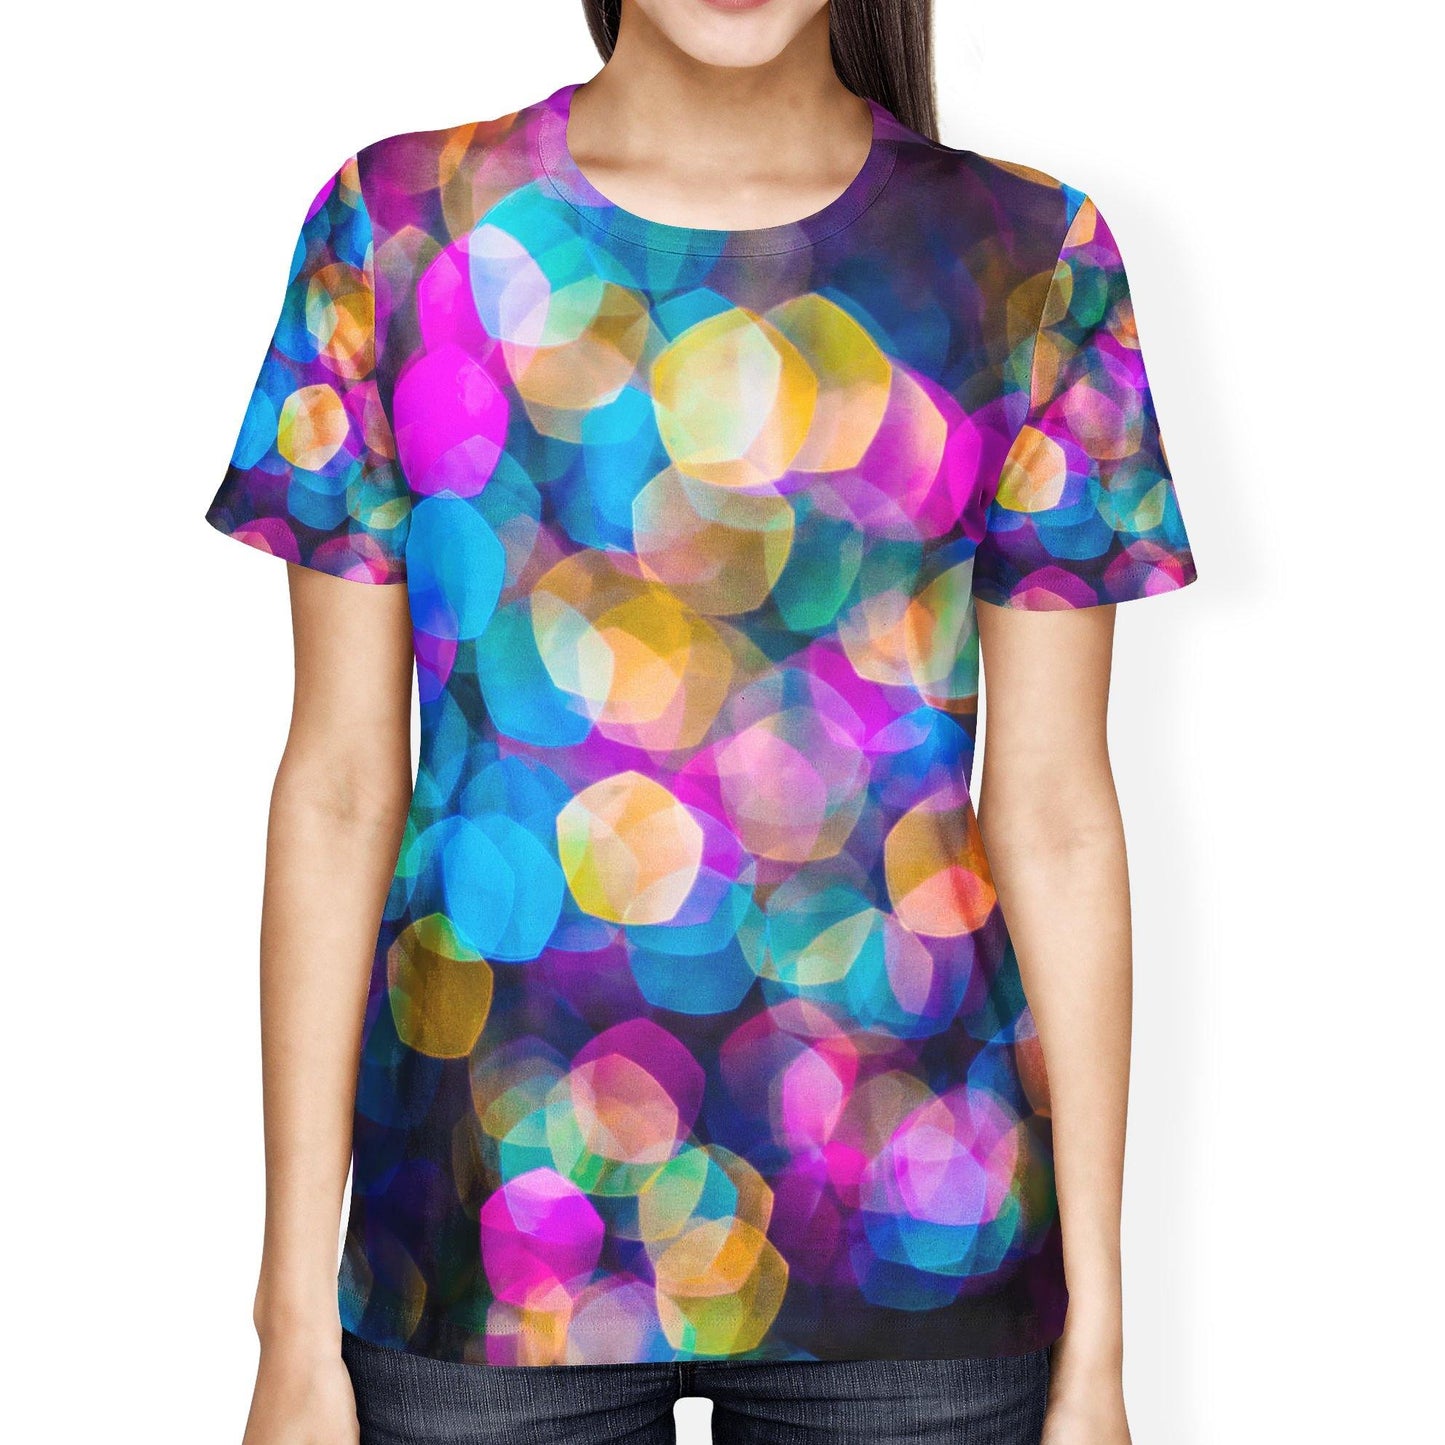 Colored Prisms Ladies' T-shirt - USA Made Dropship